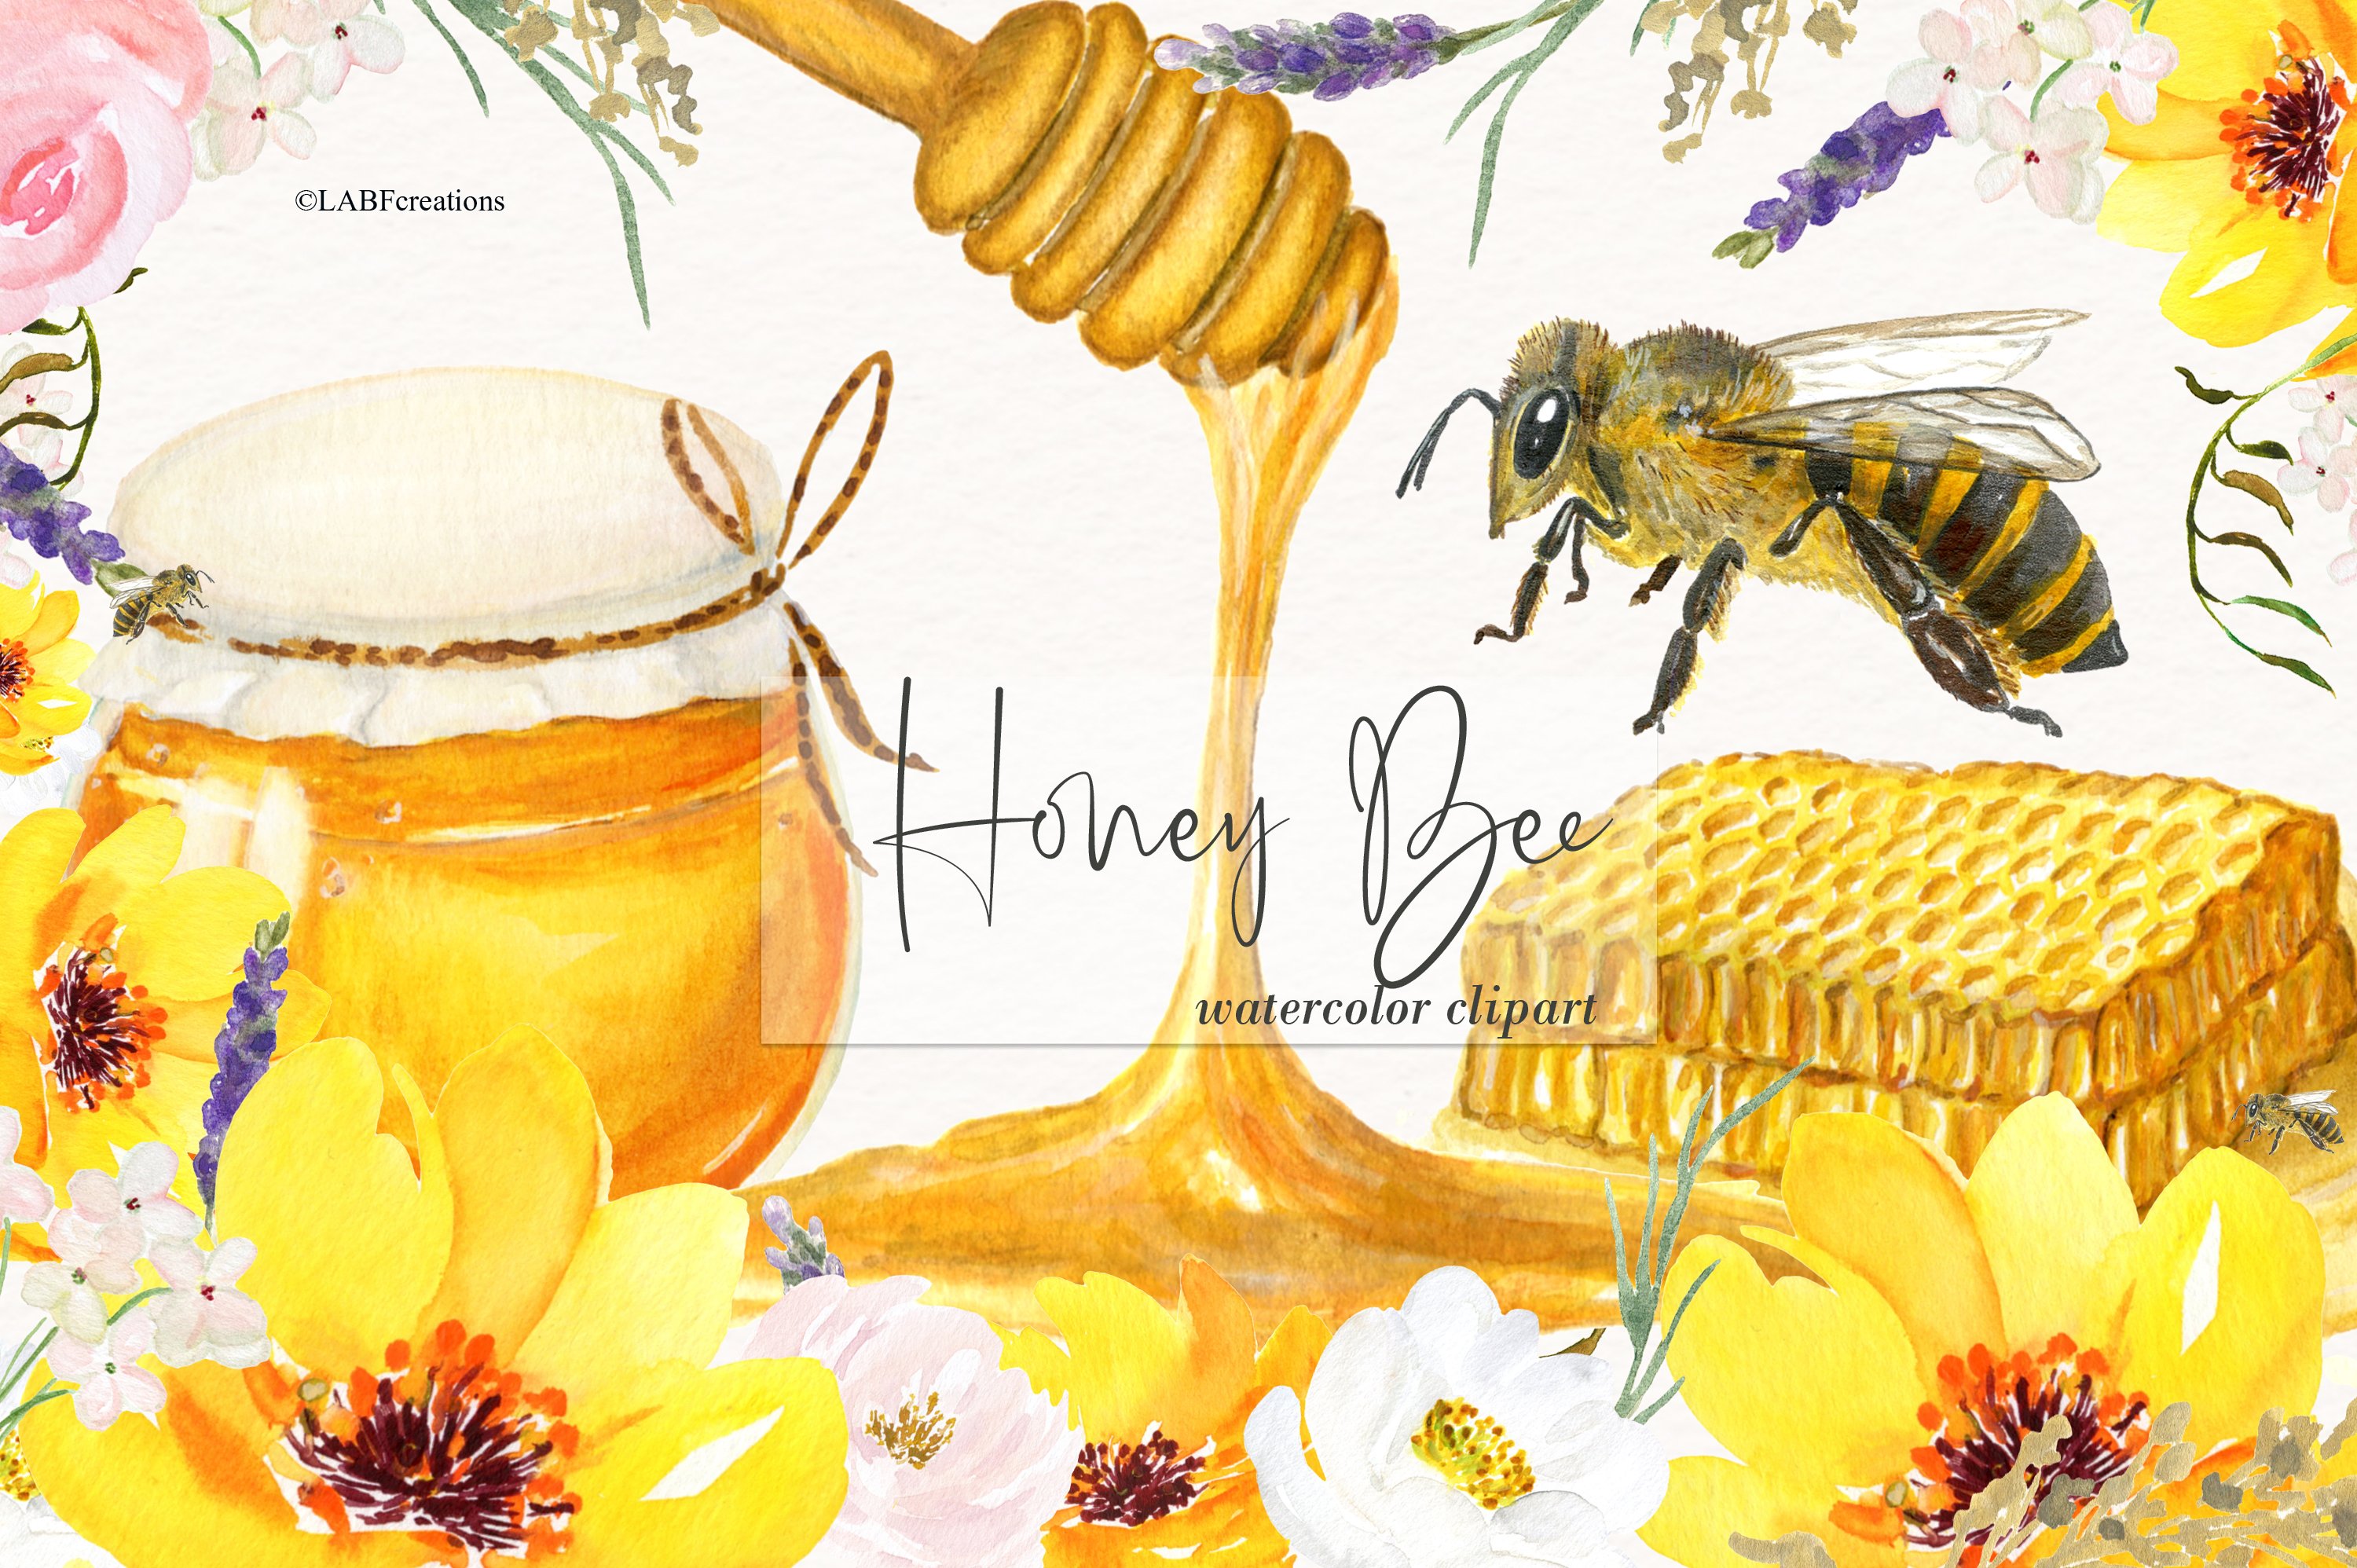 Honey Bee Watercolor cover image.